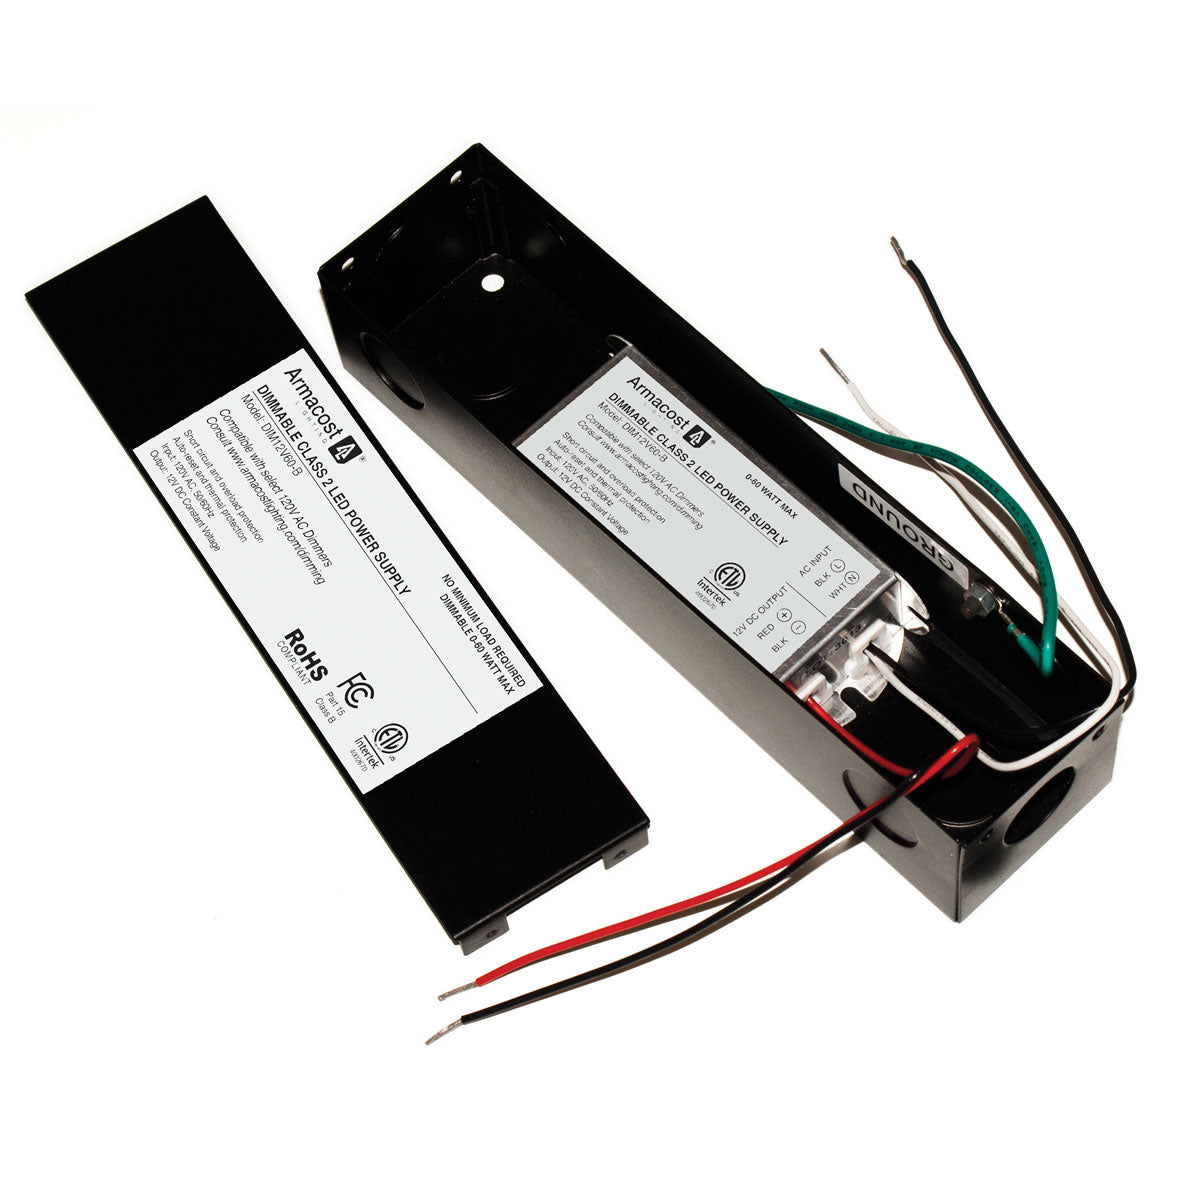 Magtech 20-4055 12w 1 LED Driver AC Dimmable 1A 7-12VDC Output 1000mA, 